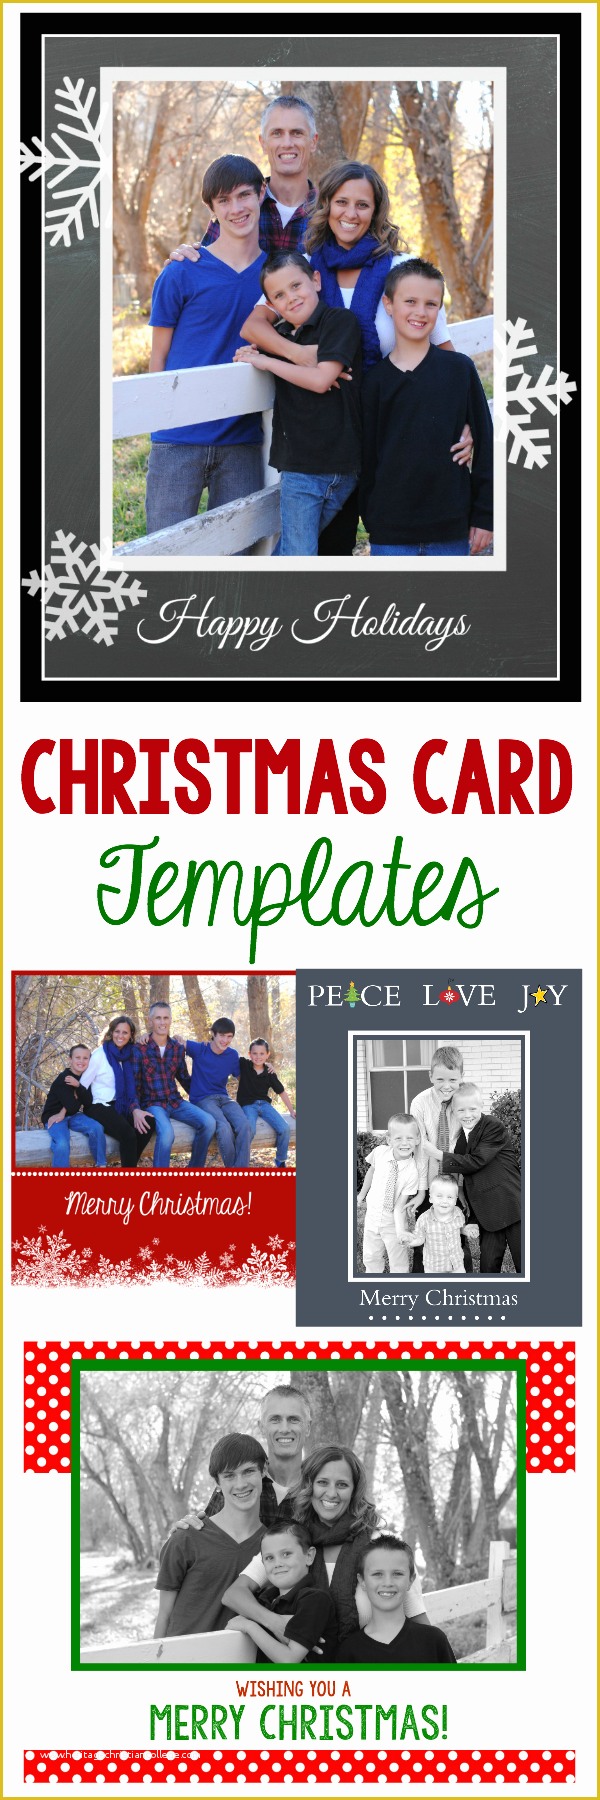 Free Photo Christmas Card Templates Of 50 Free Holiday Card Templates Moritz Fine Designs